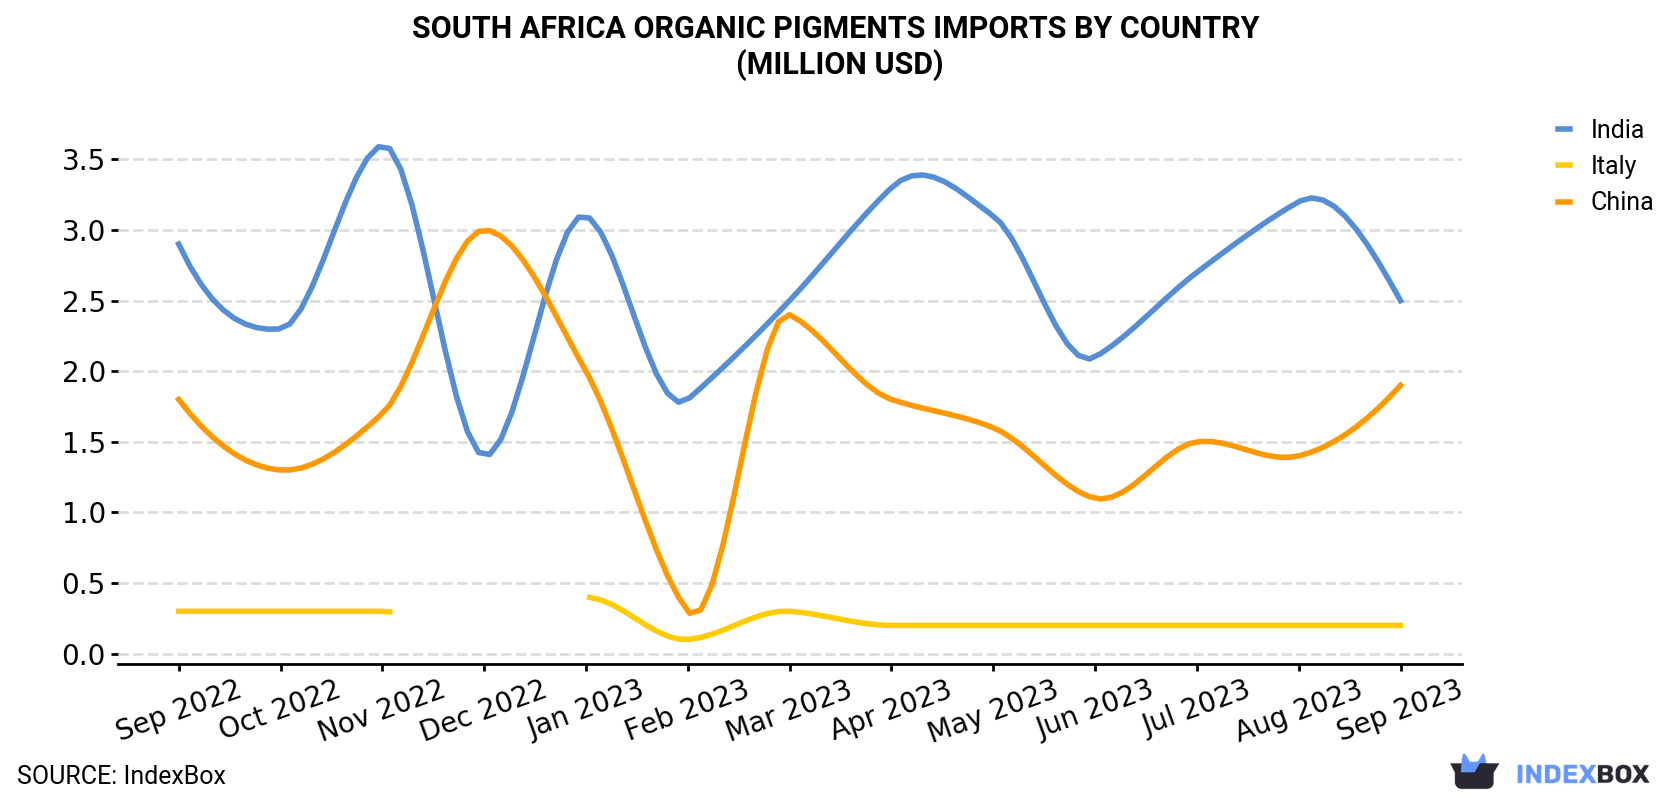 South Africa Organic Pigments Imports By Country (Million USD)